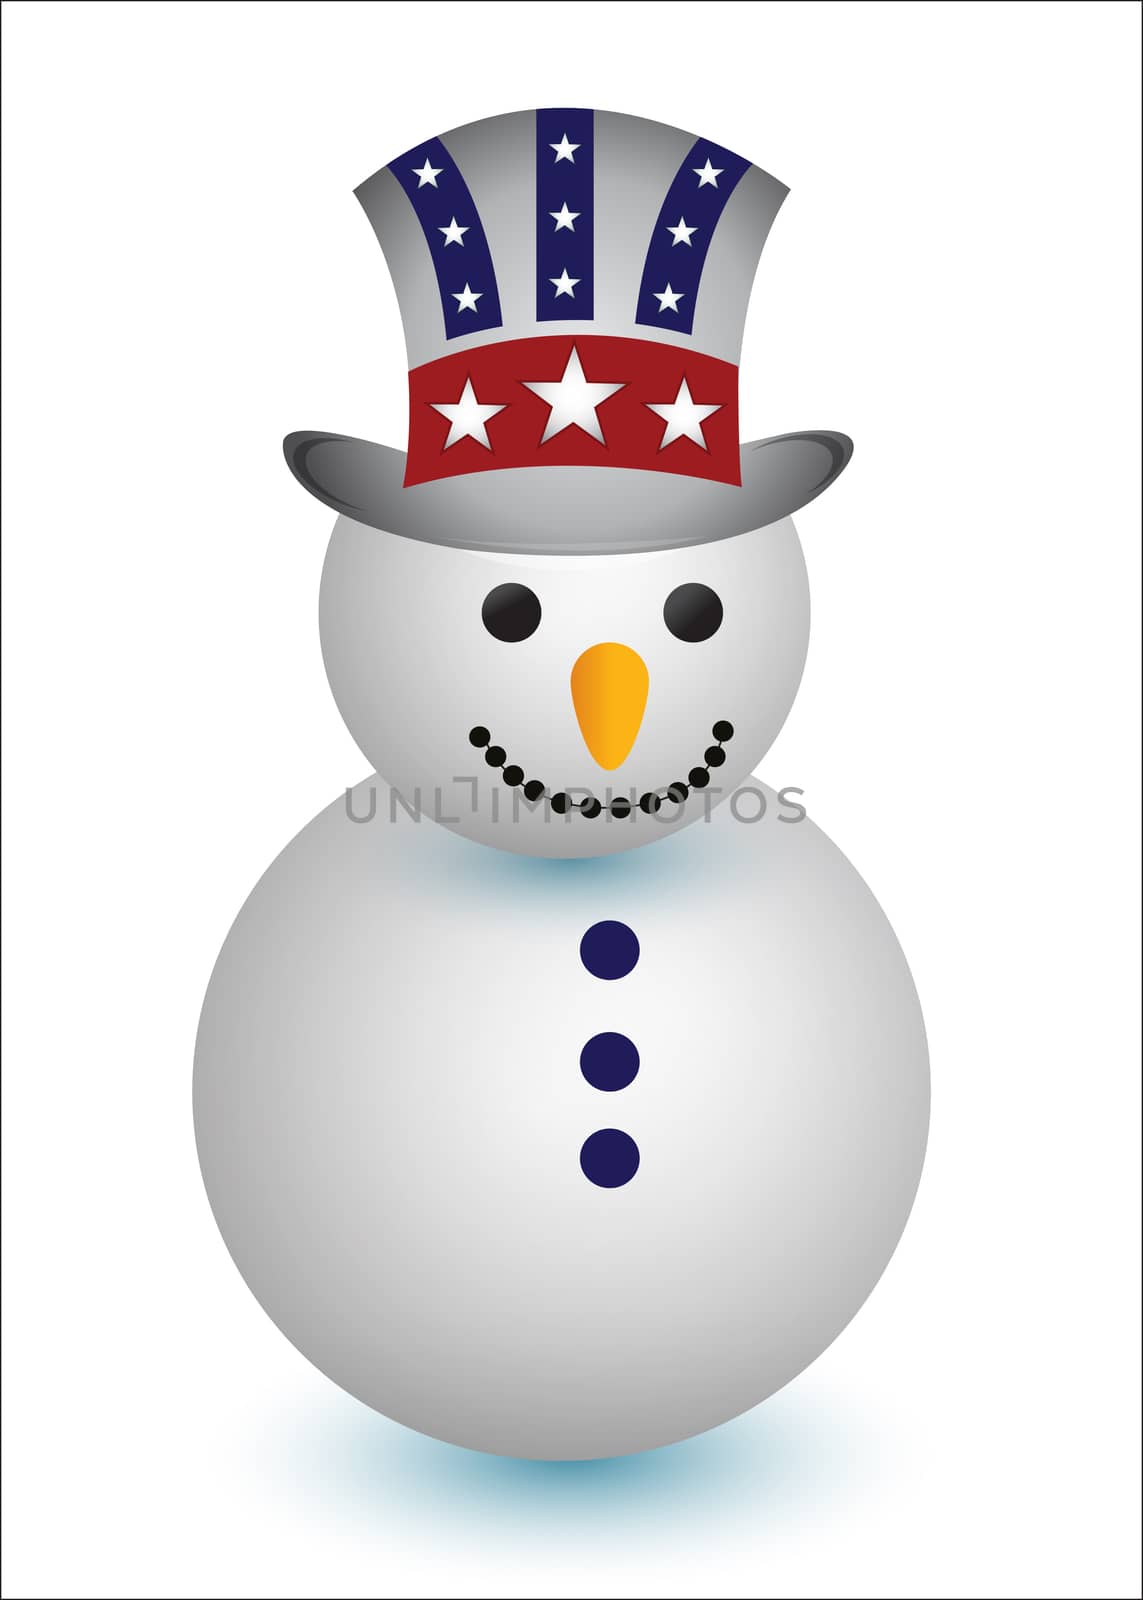 Snowman with uncle sam us hat by alexmillos